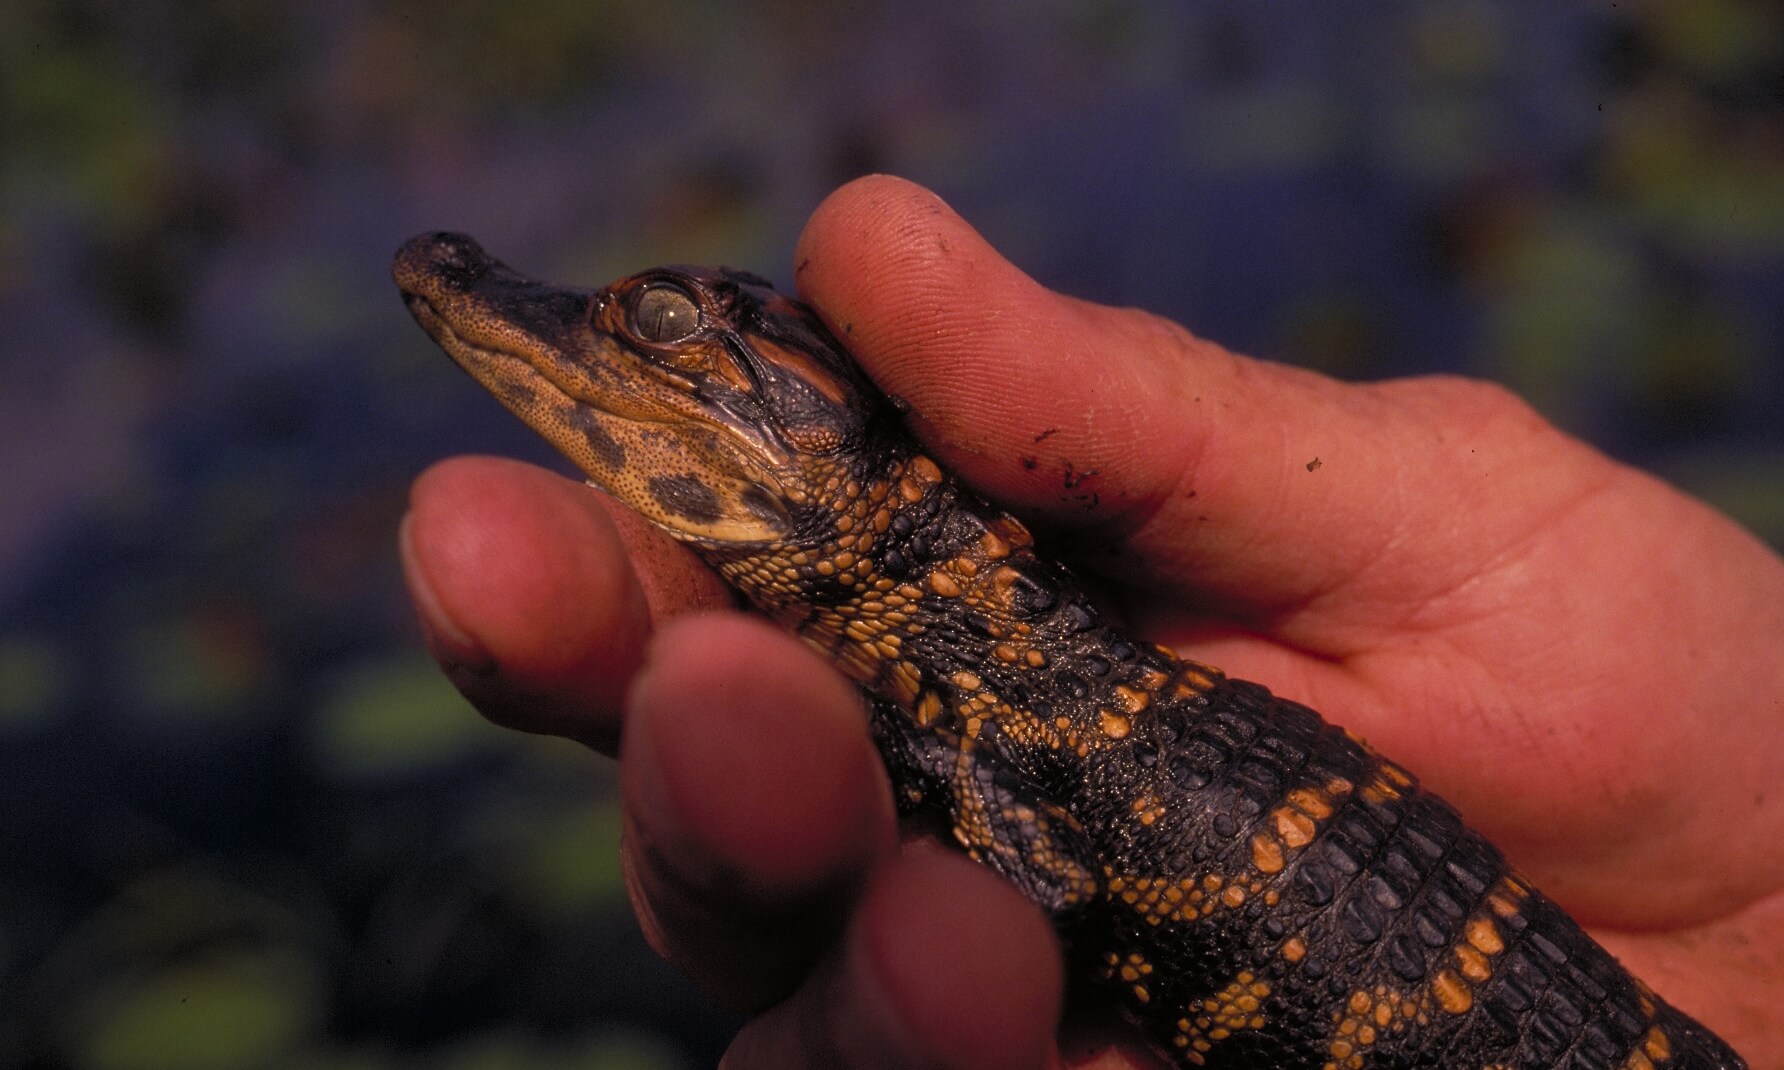 Hand holding a baby alligator